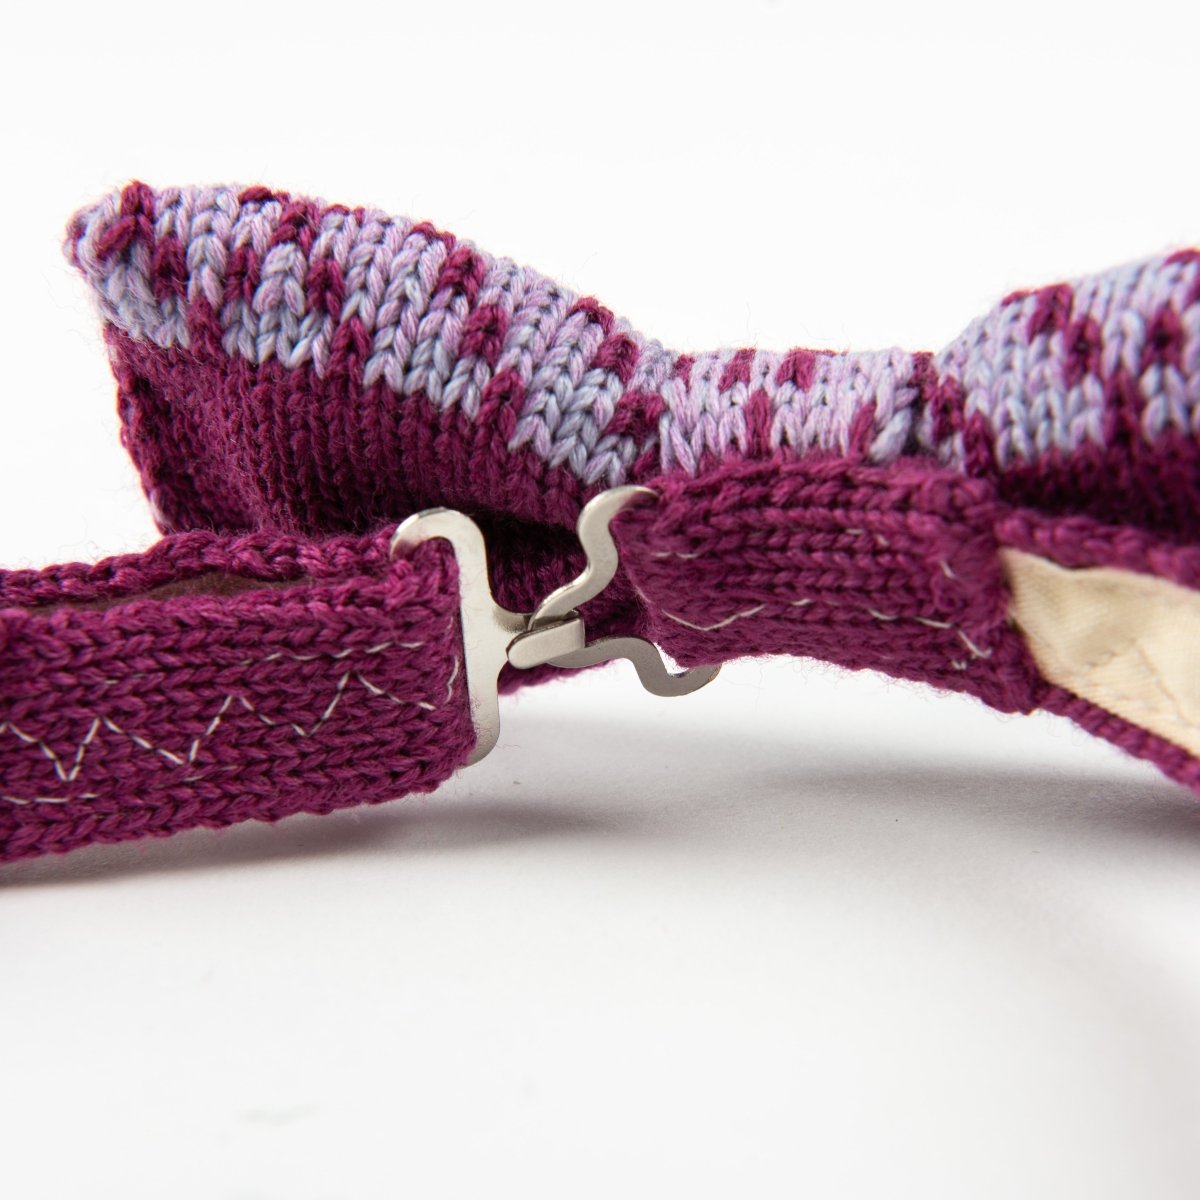 Lilac Whimsy Bow Tie - Wool & Water